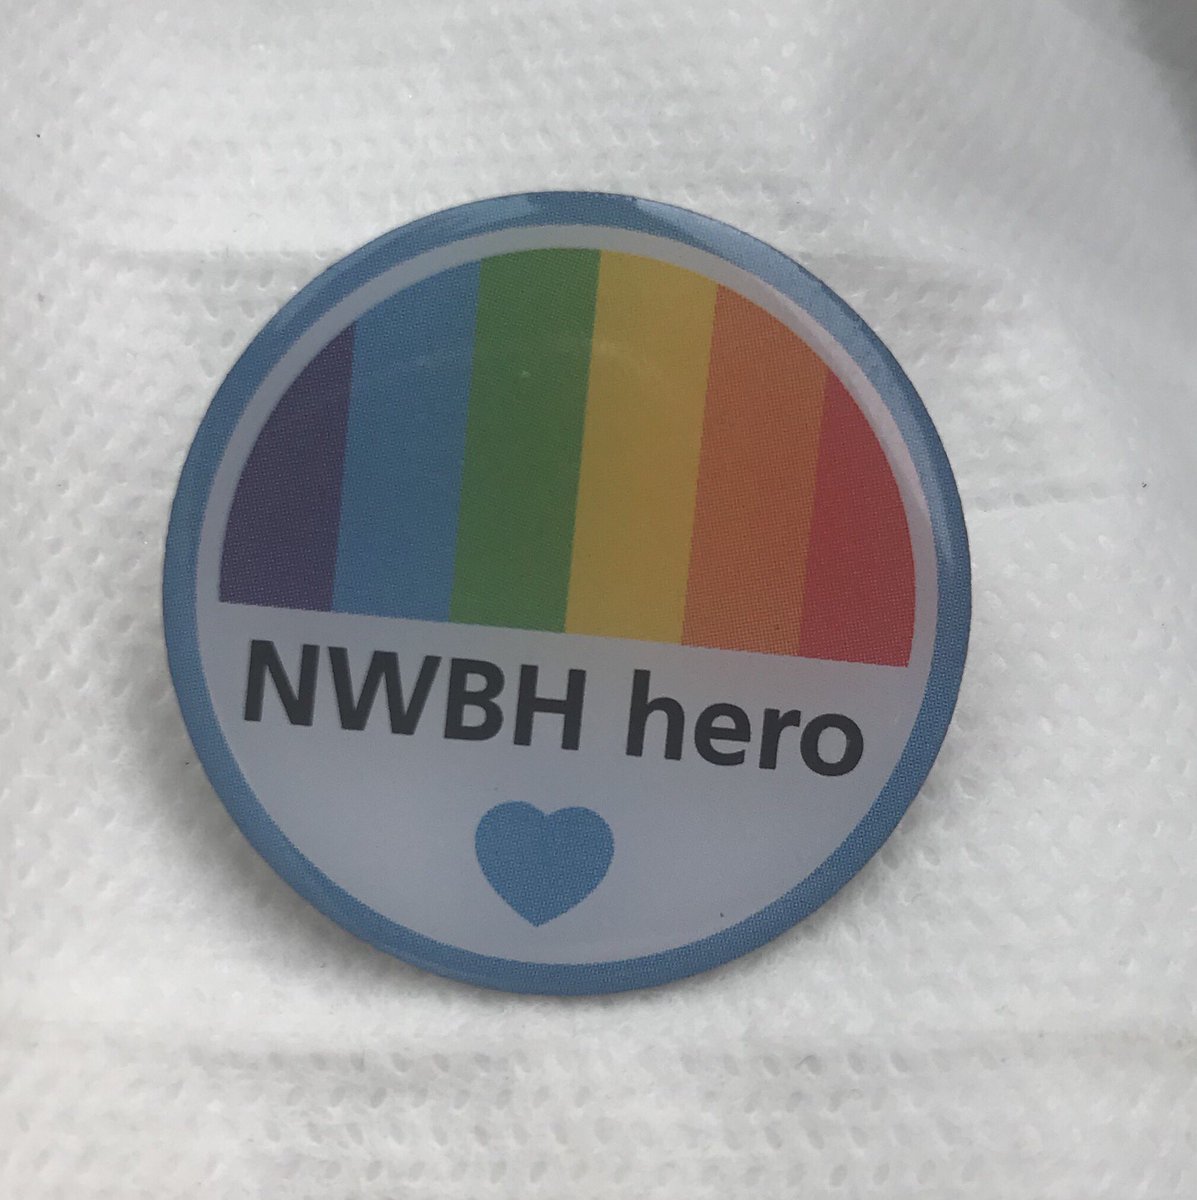 Says it all that in my entire 19 years in the #nhs I’ve worked for just one Trust @NWBoroughsNHS An amazing family of incredible colleagues - it’s been a pleasure and a privilege 🌈💙